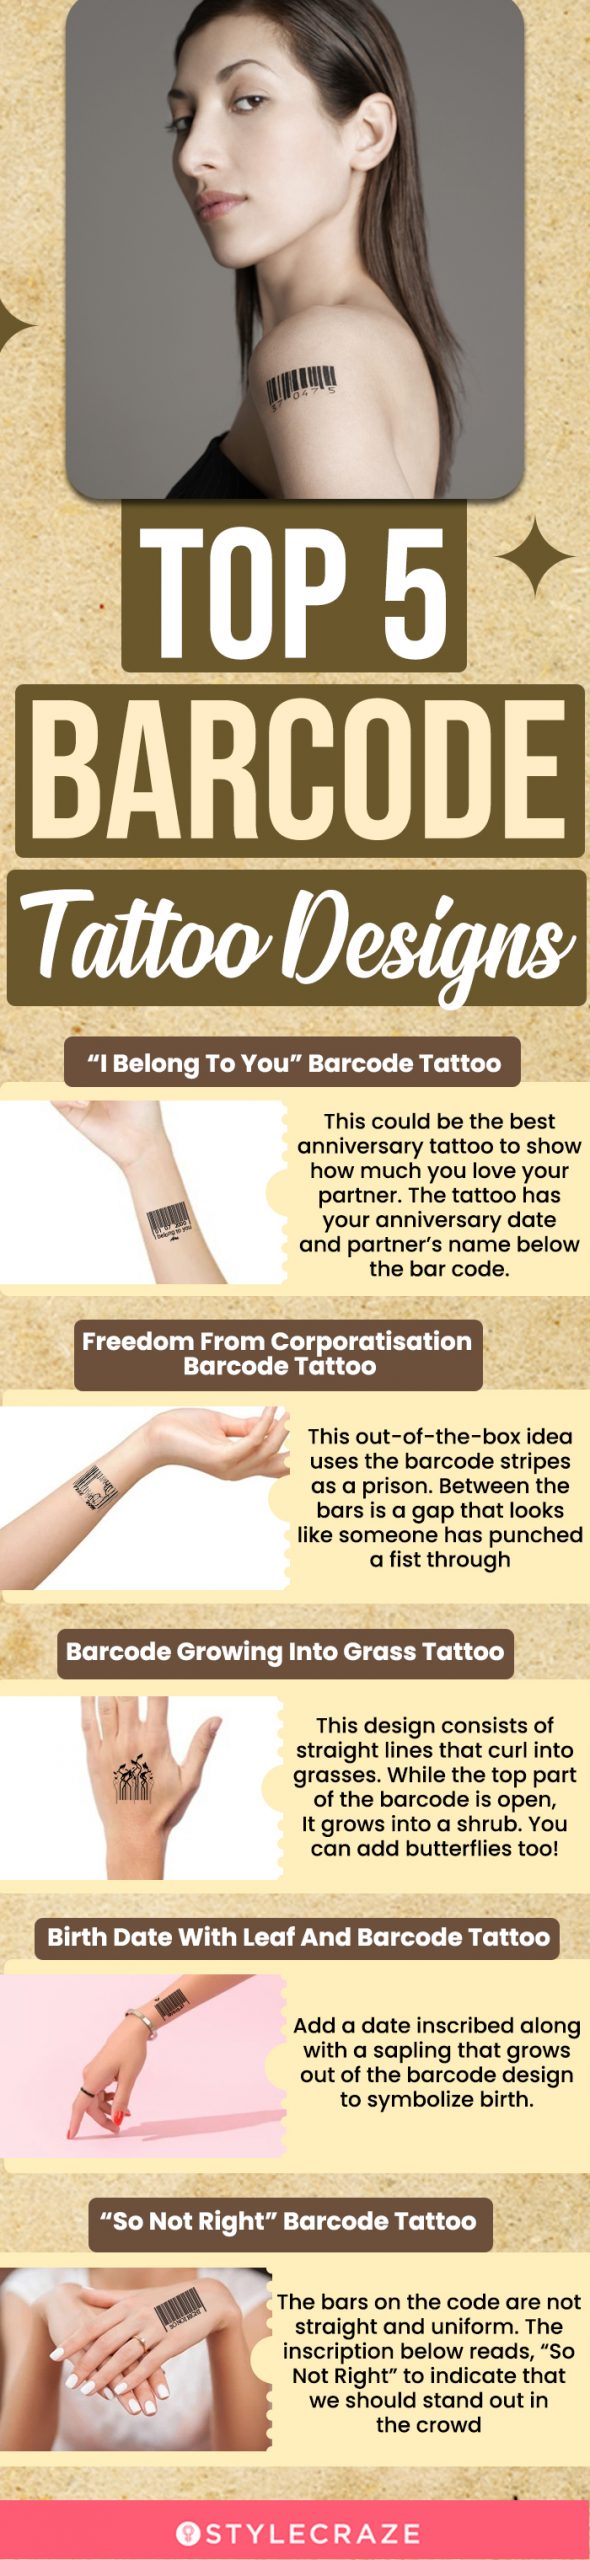 Top 5 Barcode Tattoo Designs scaled